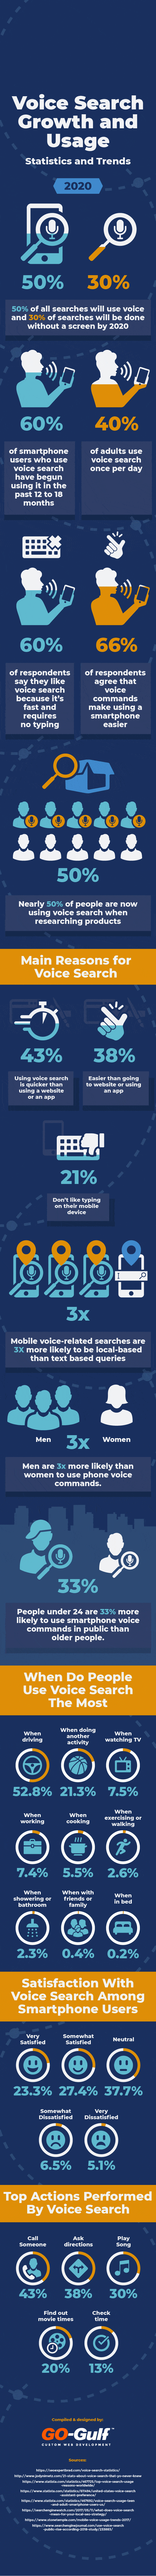 Voice Search Growth And Usage